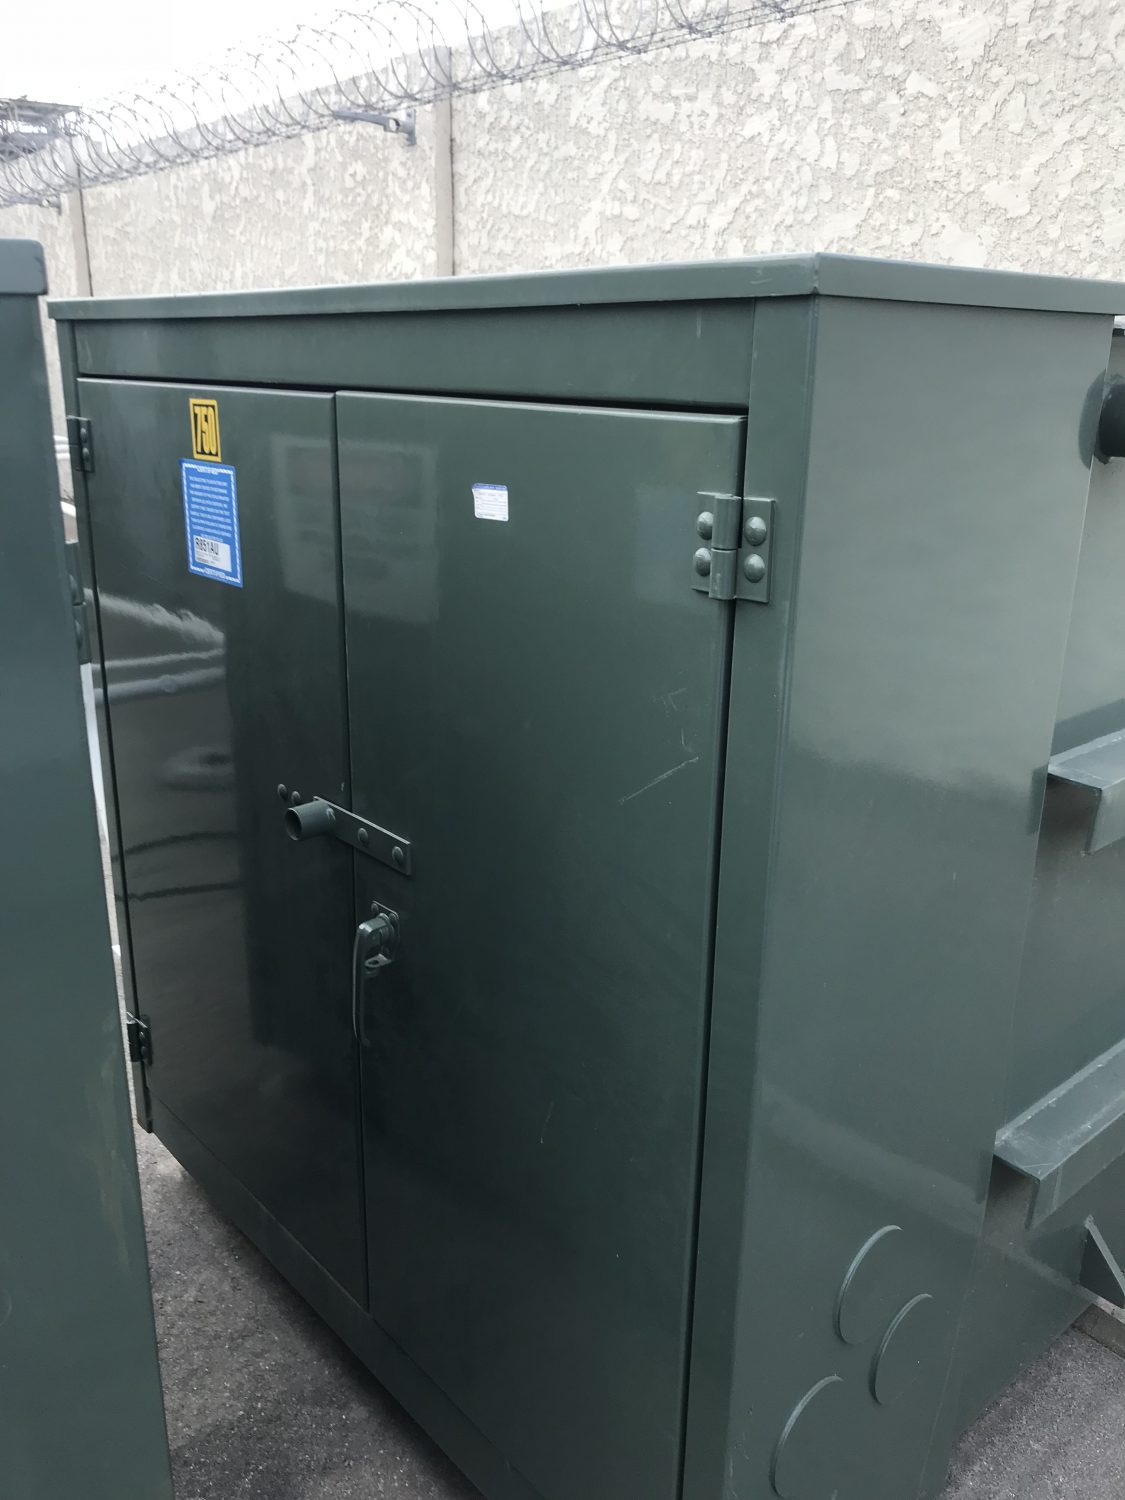 Sell Pad Mounted Transformers Near Chicago